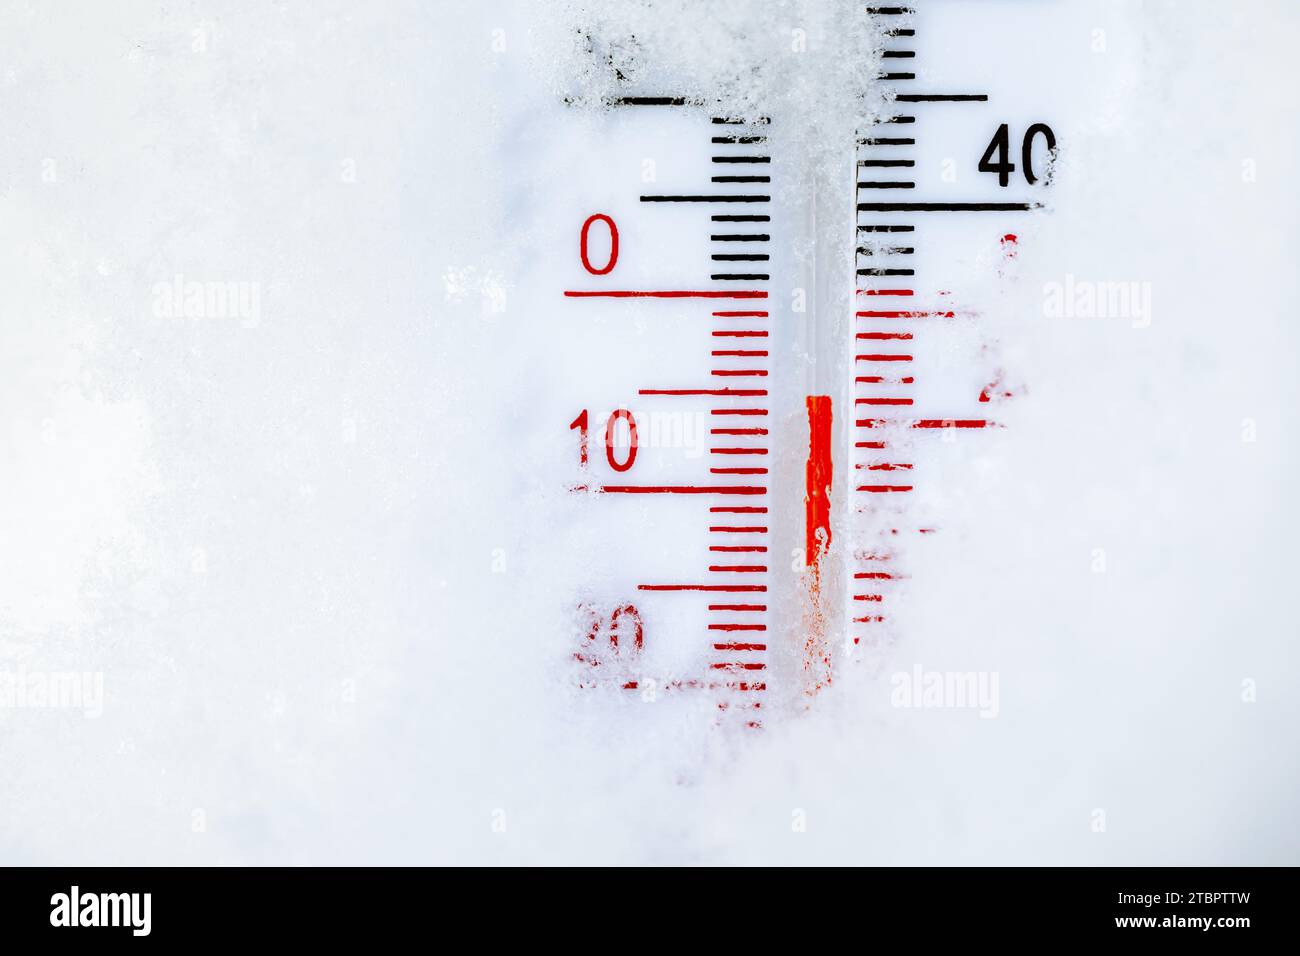 Thermometer with both Celsius and Fahrenheit scales placed in fresh snow indicating cold winter temperature Stock Photo